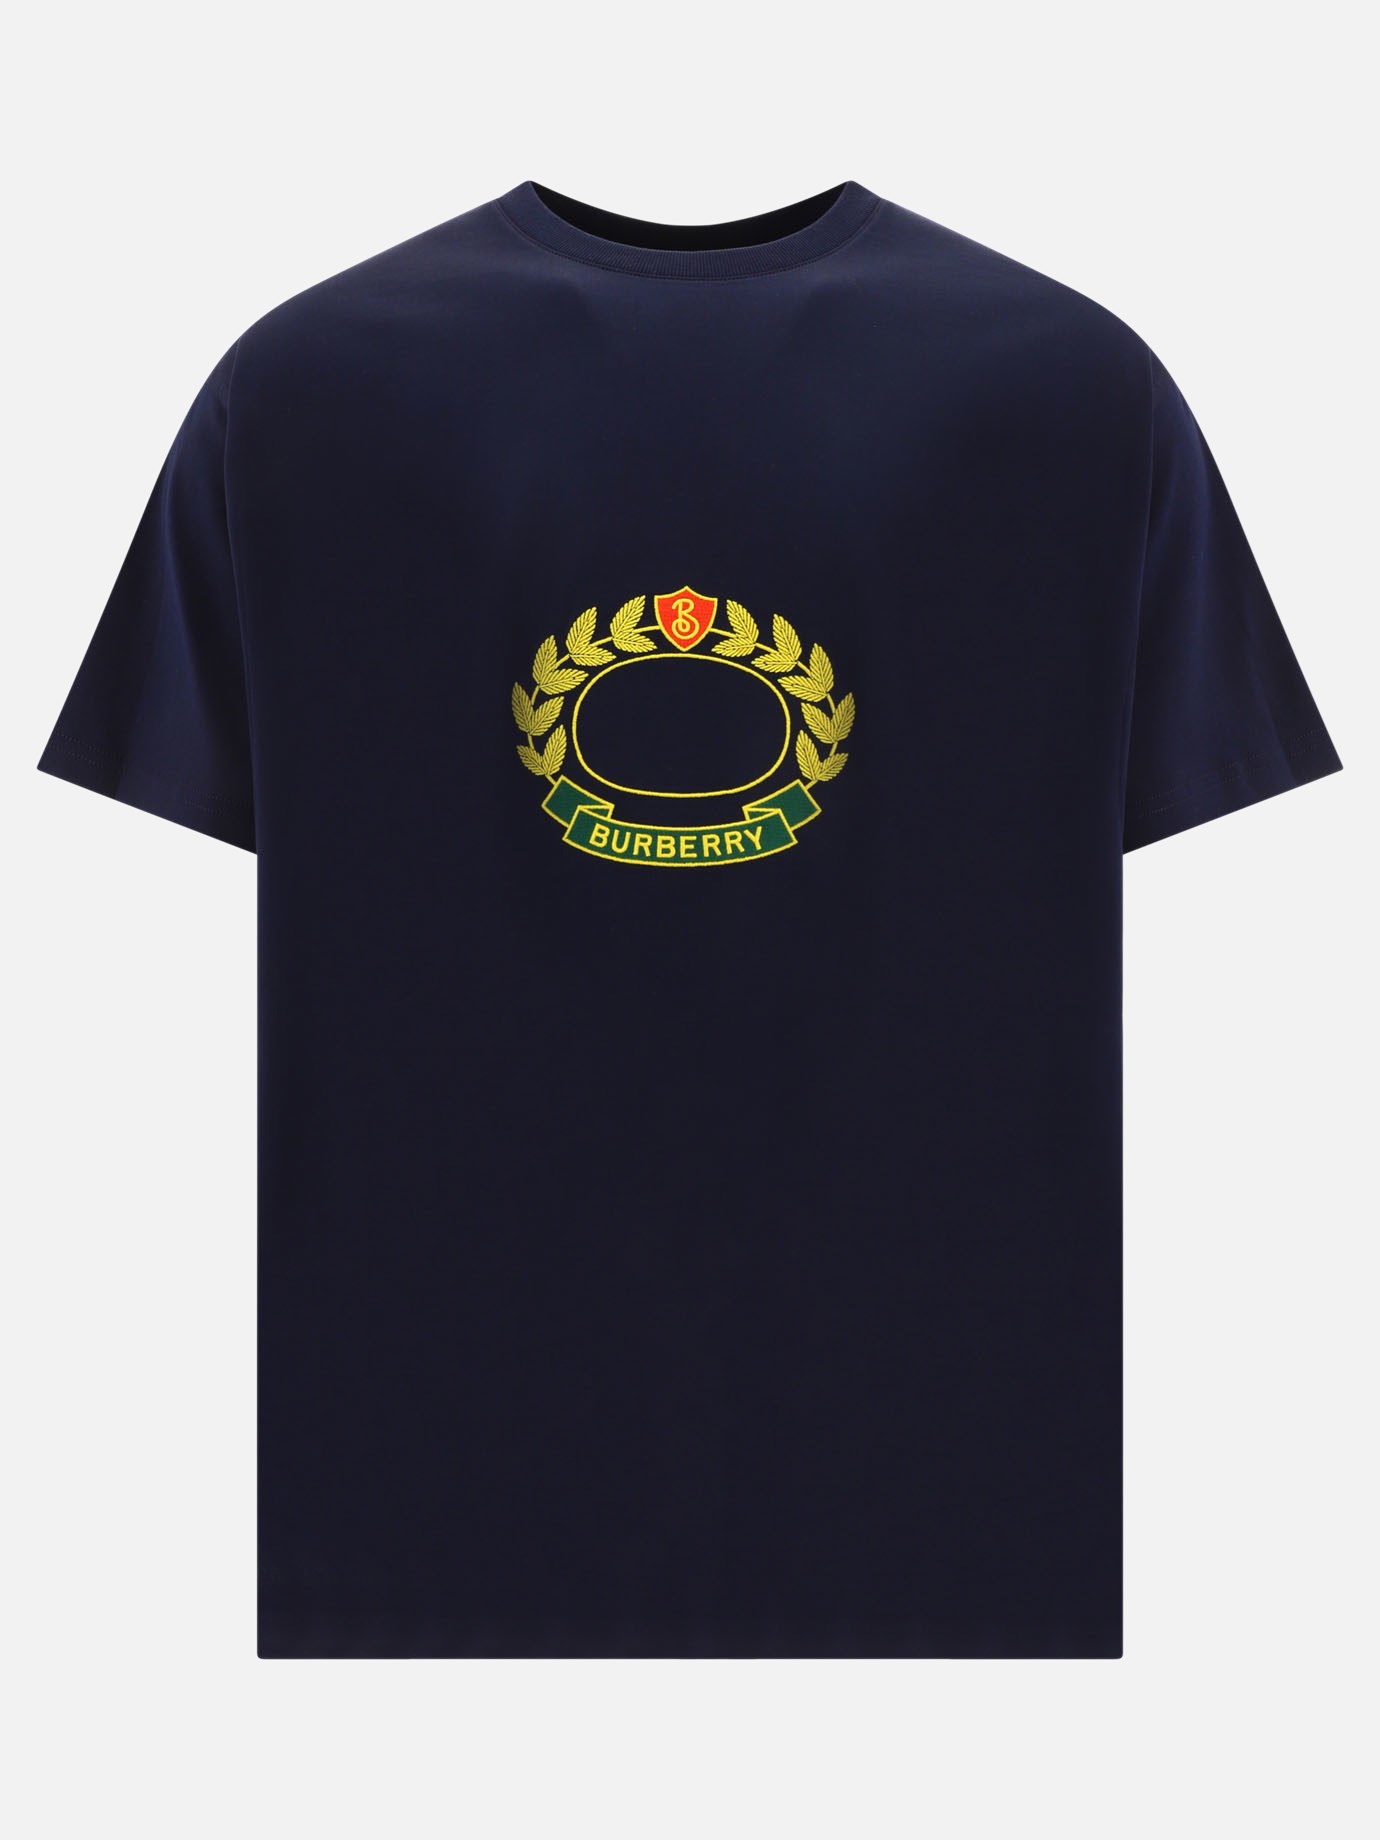 T-shirt  Purley by Burberry - 0